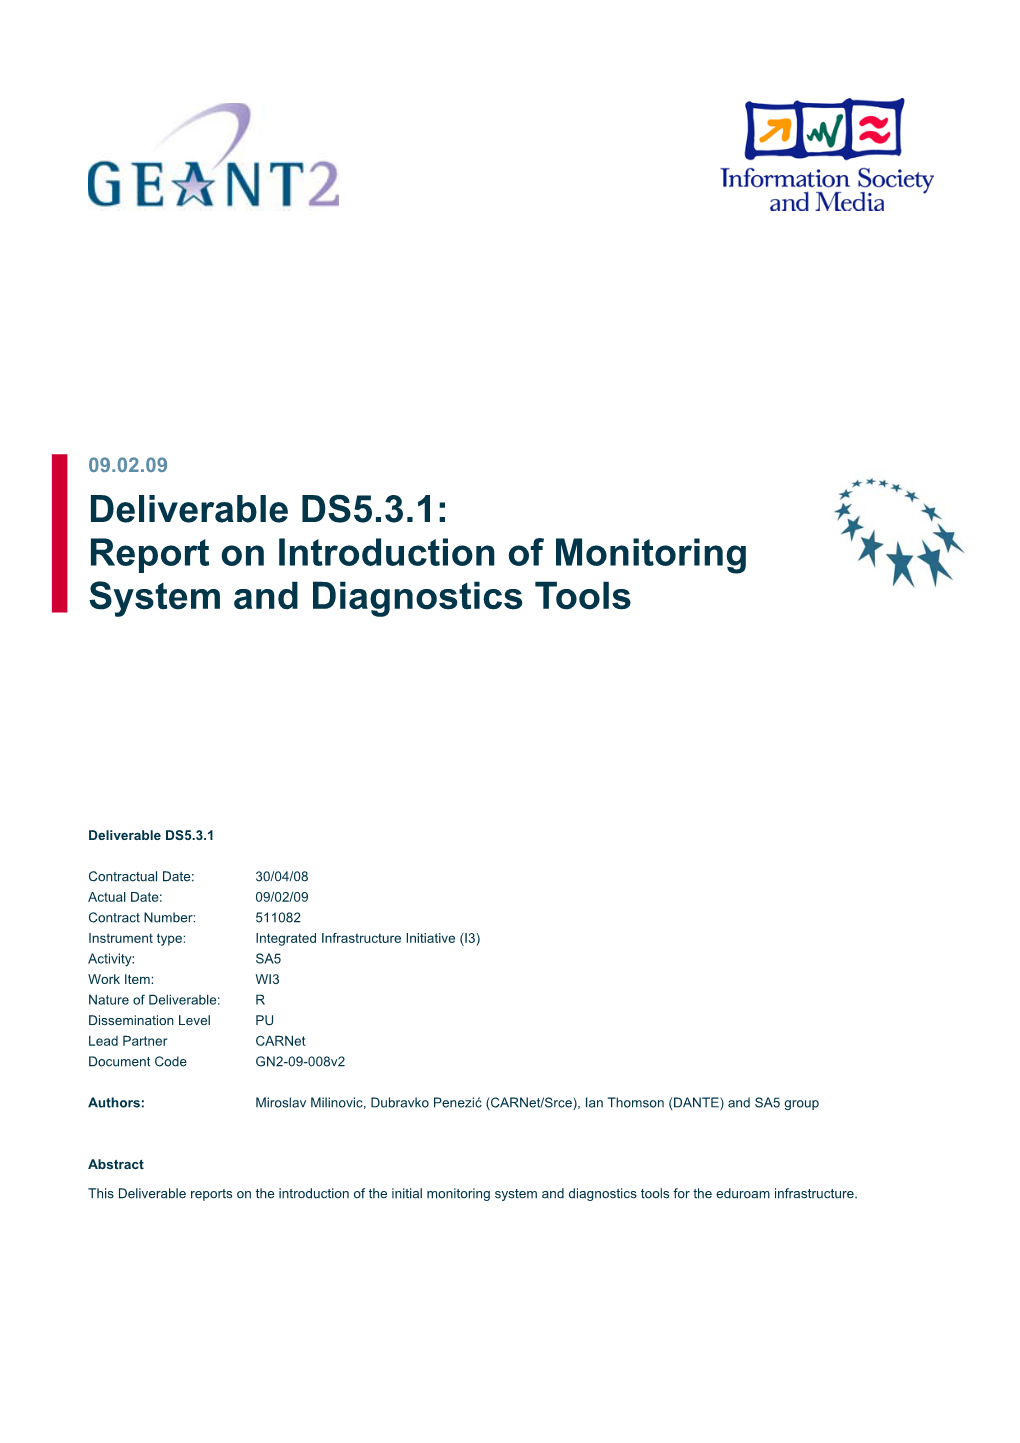 Deliverable DS5.3.1: Report on Introduction of Monitoring System and Diagnostics Tools